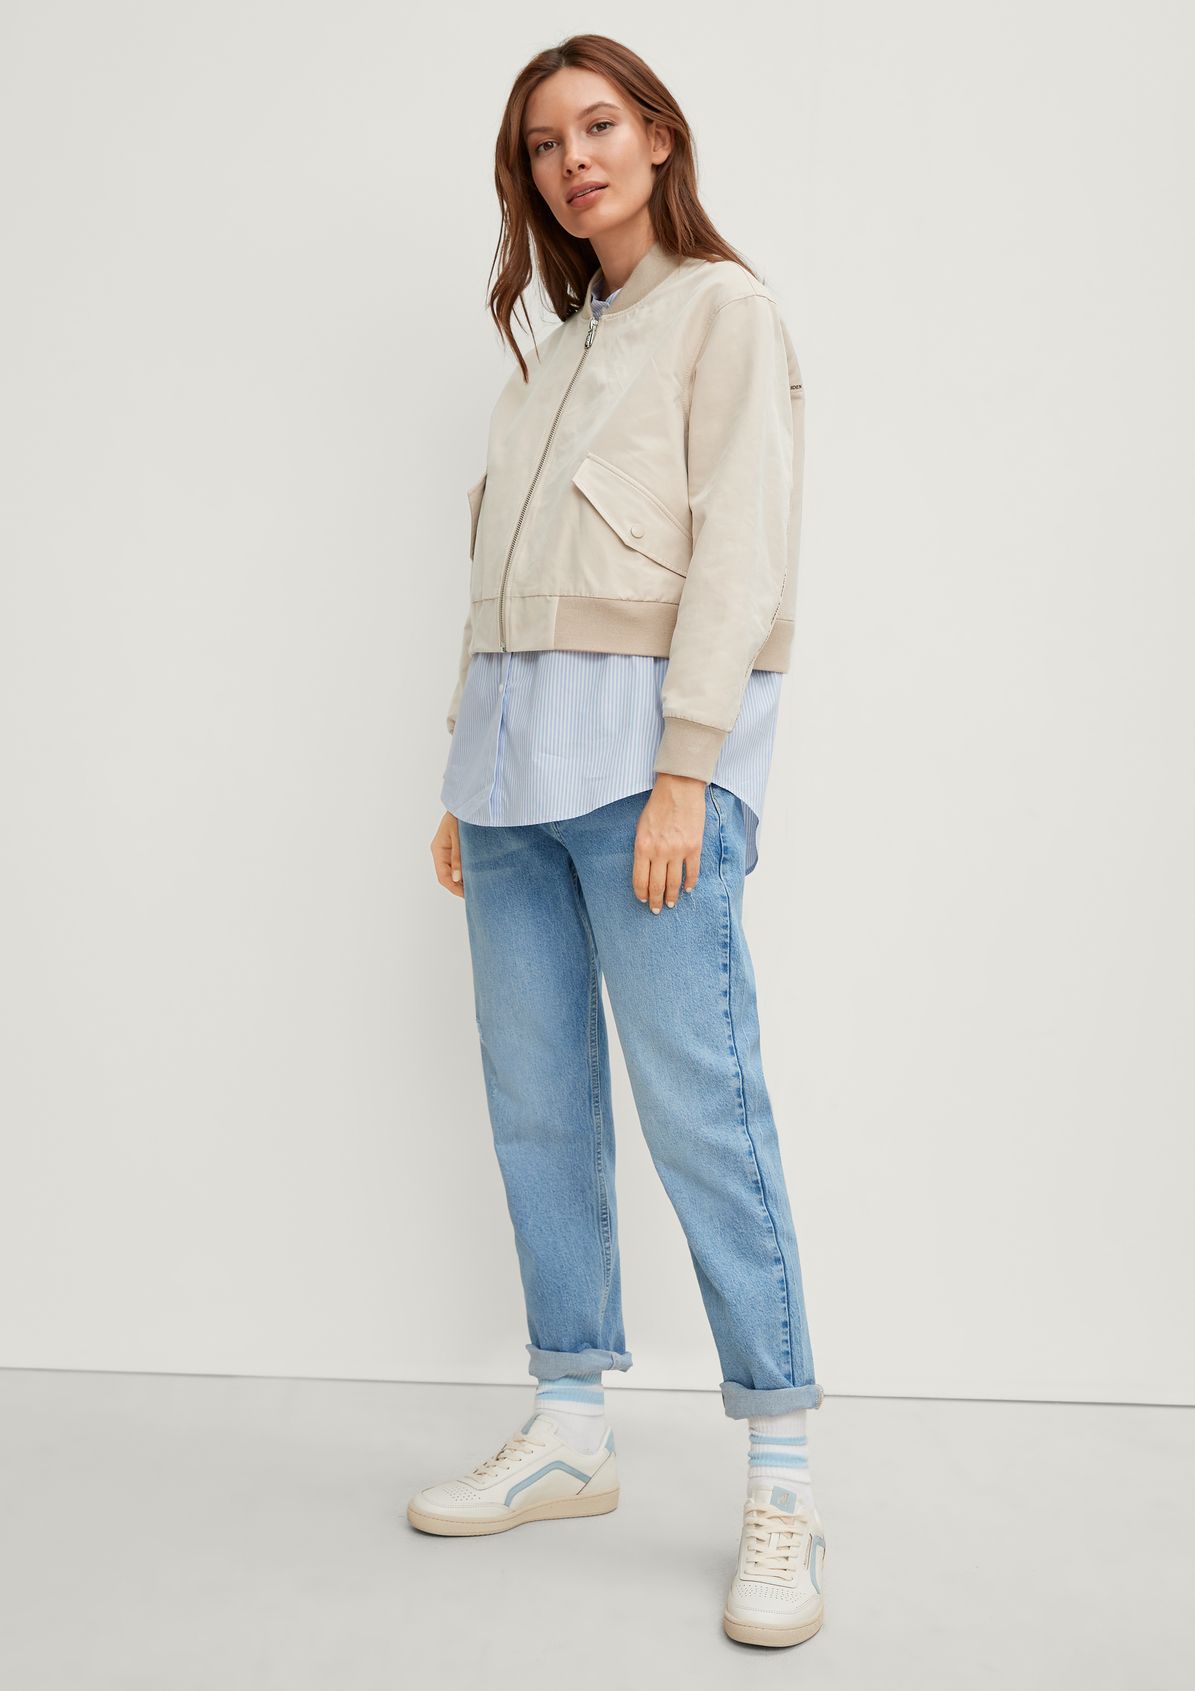 Bomber jacket with a blouse insert from comma